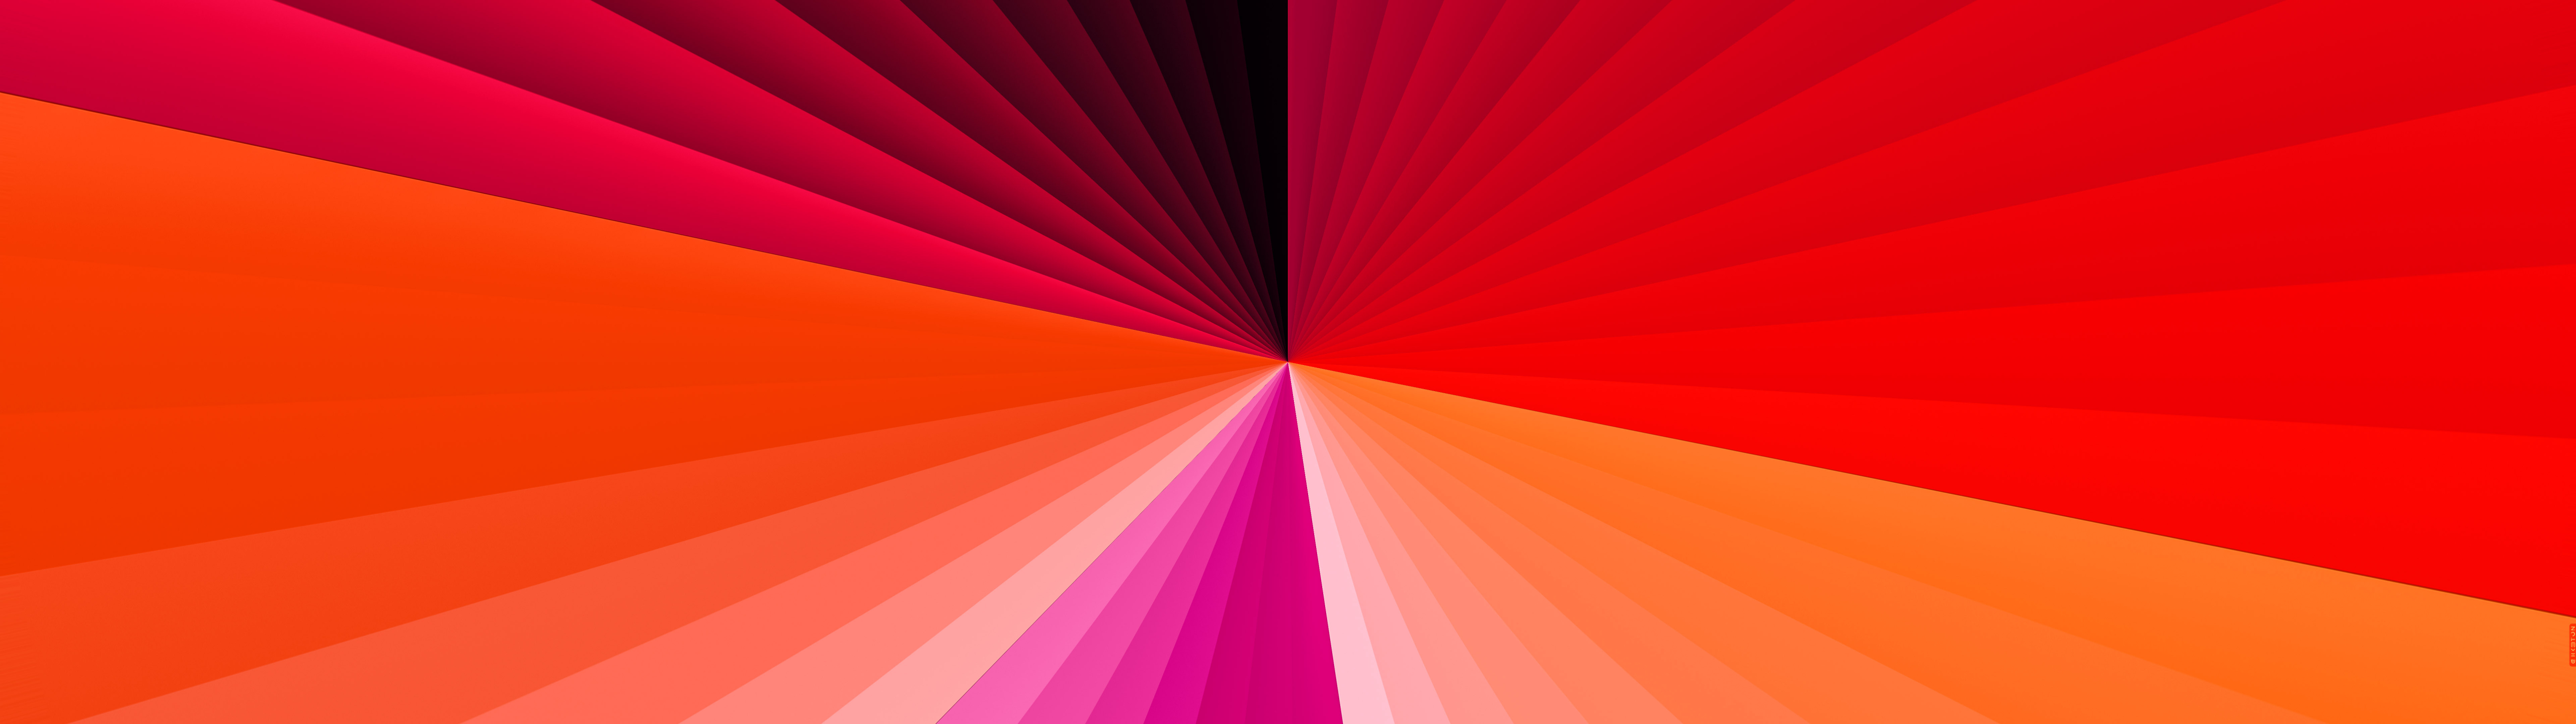 5120x1440 Gradient 8k Abstract Colors 5120x1440 Resolution Wallpaper